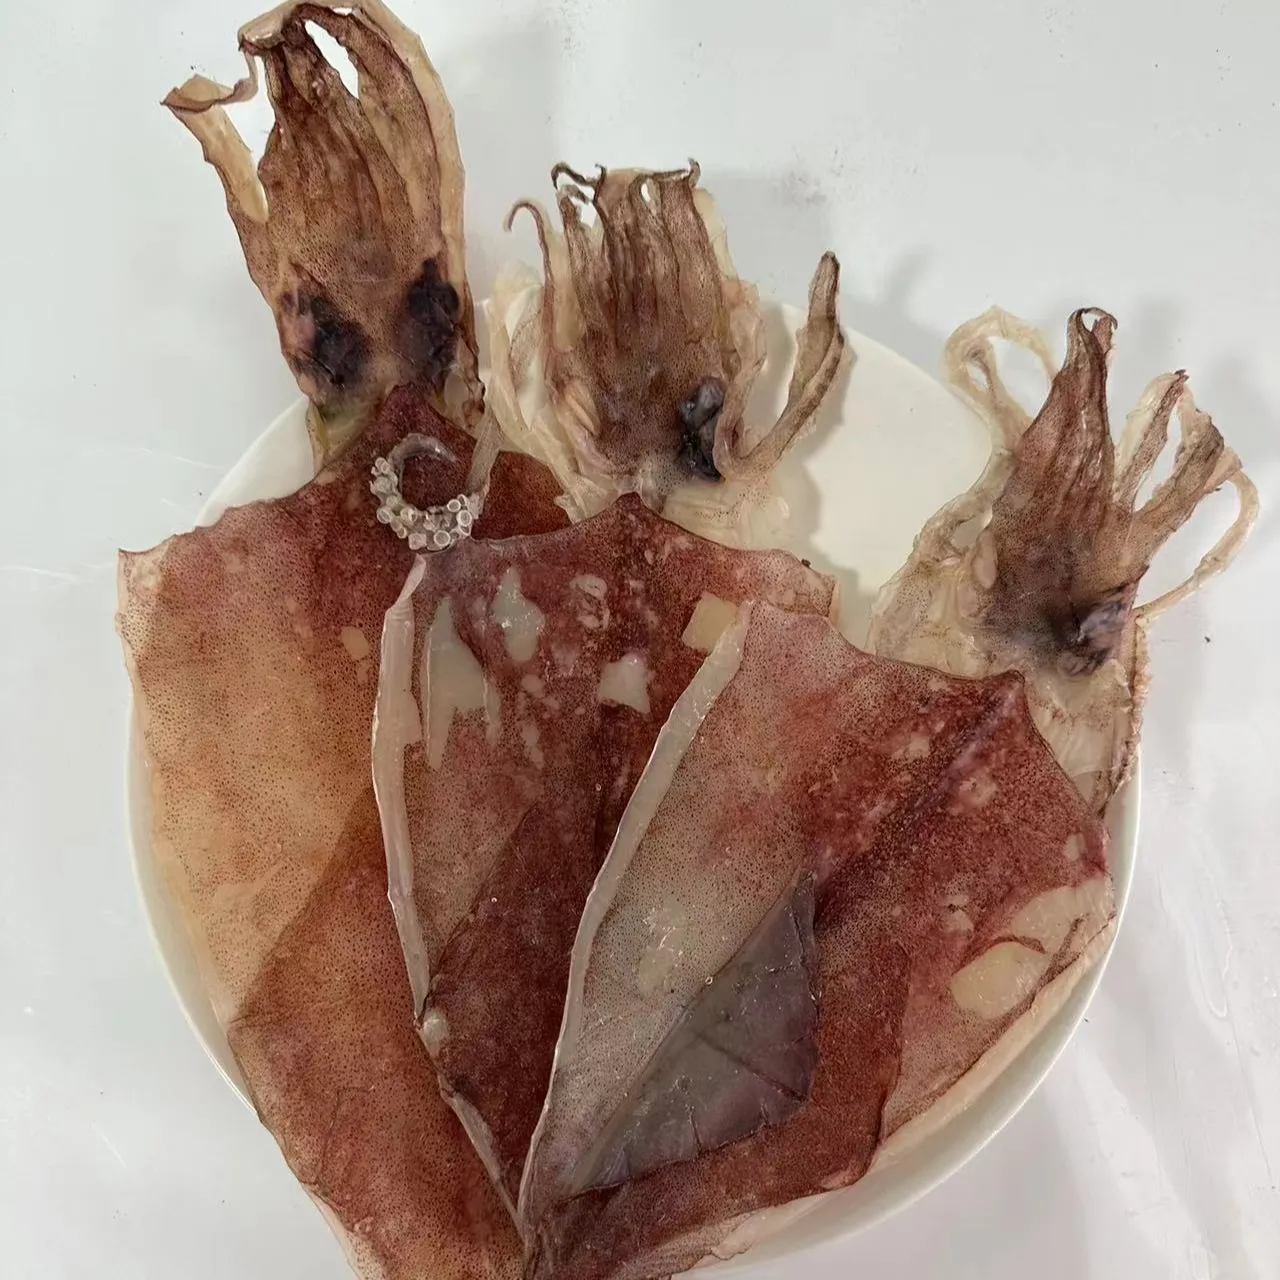 Dried illex squid sale or without salt Dried various Squid